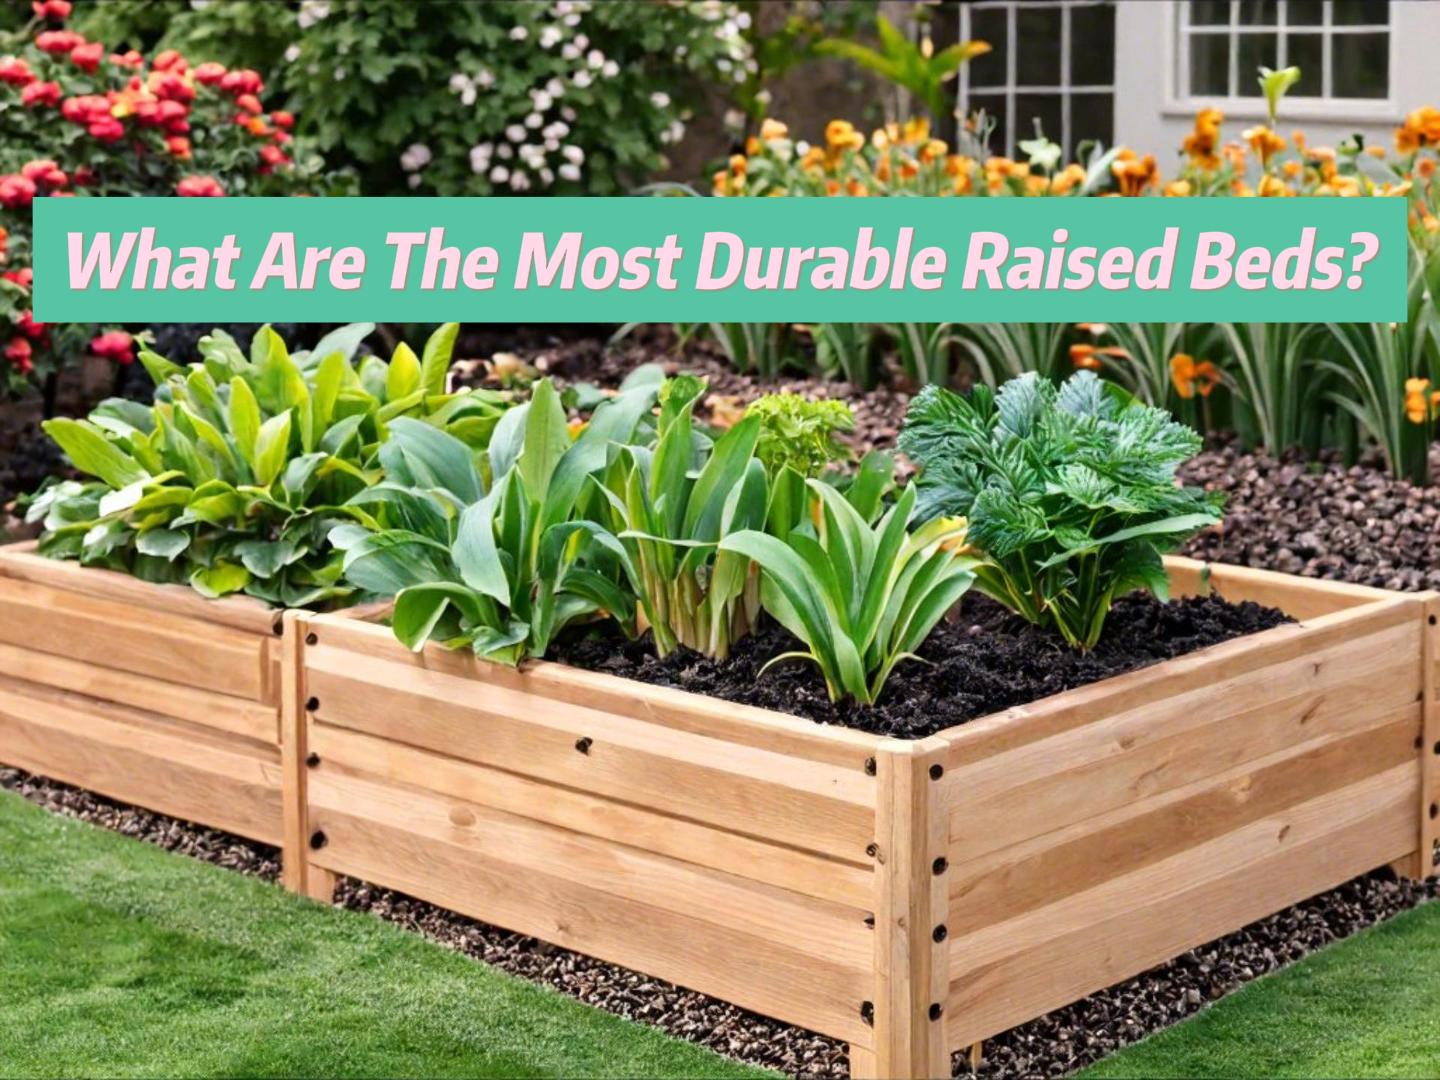 What are the most durable raised beds?